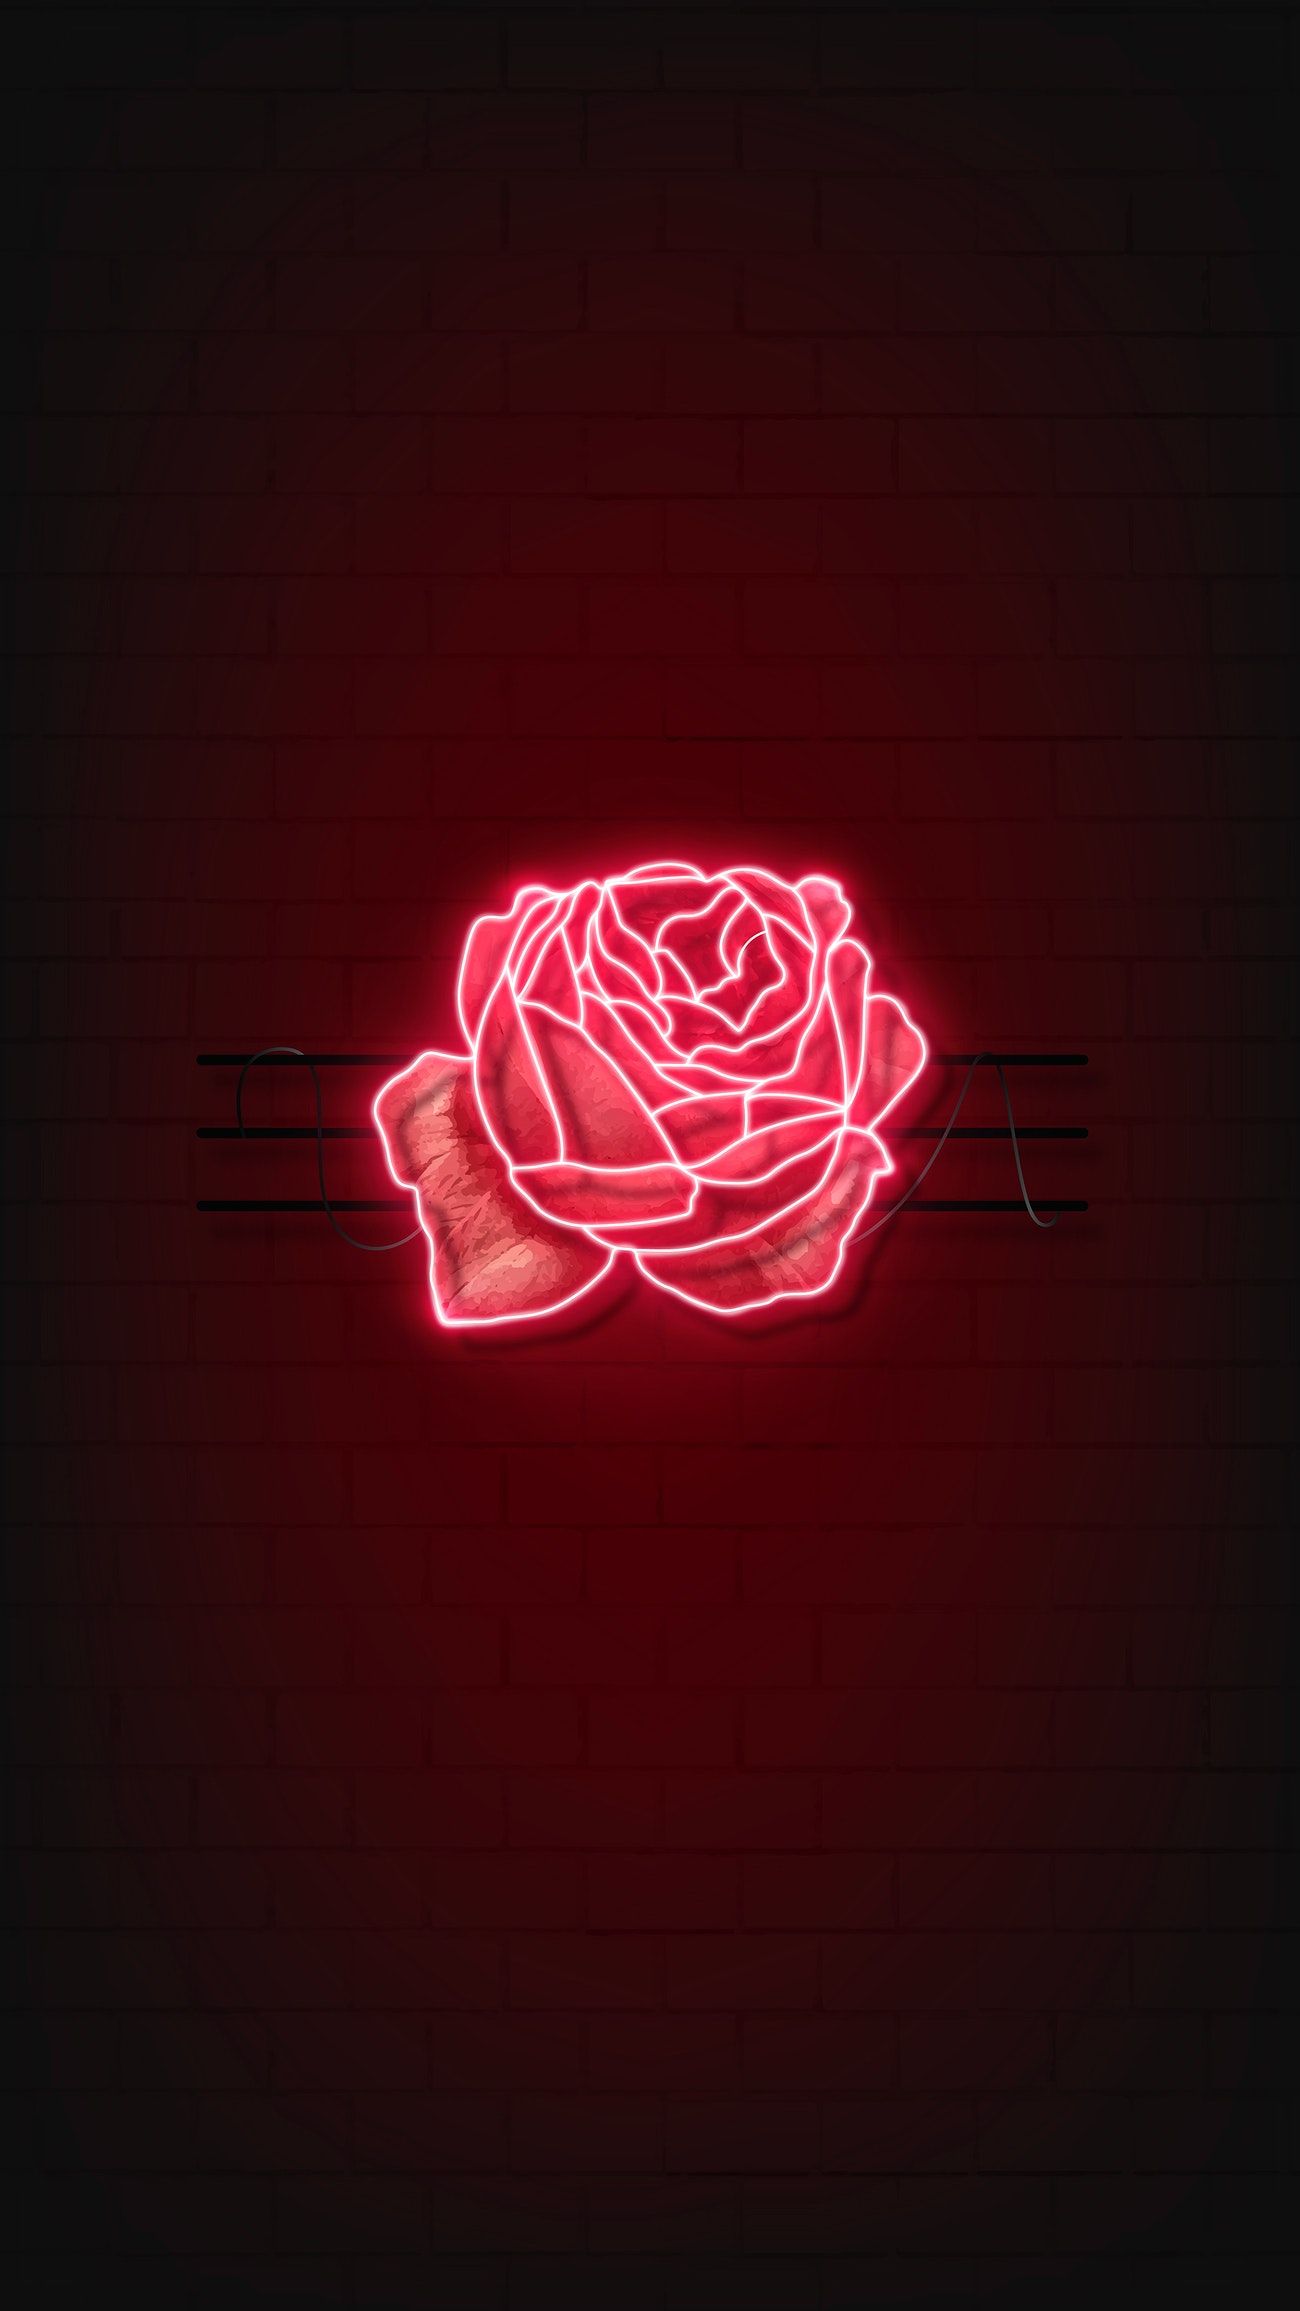 Red rose mobile wallpaper. Royalty free vector